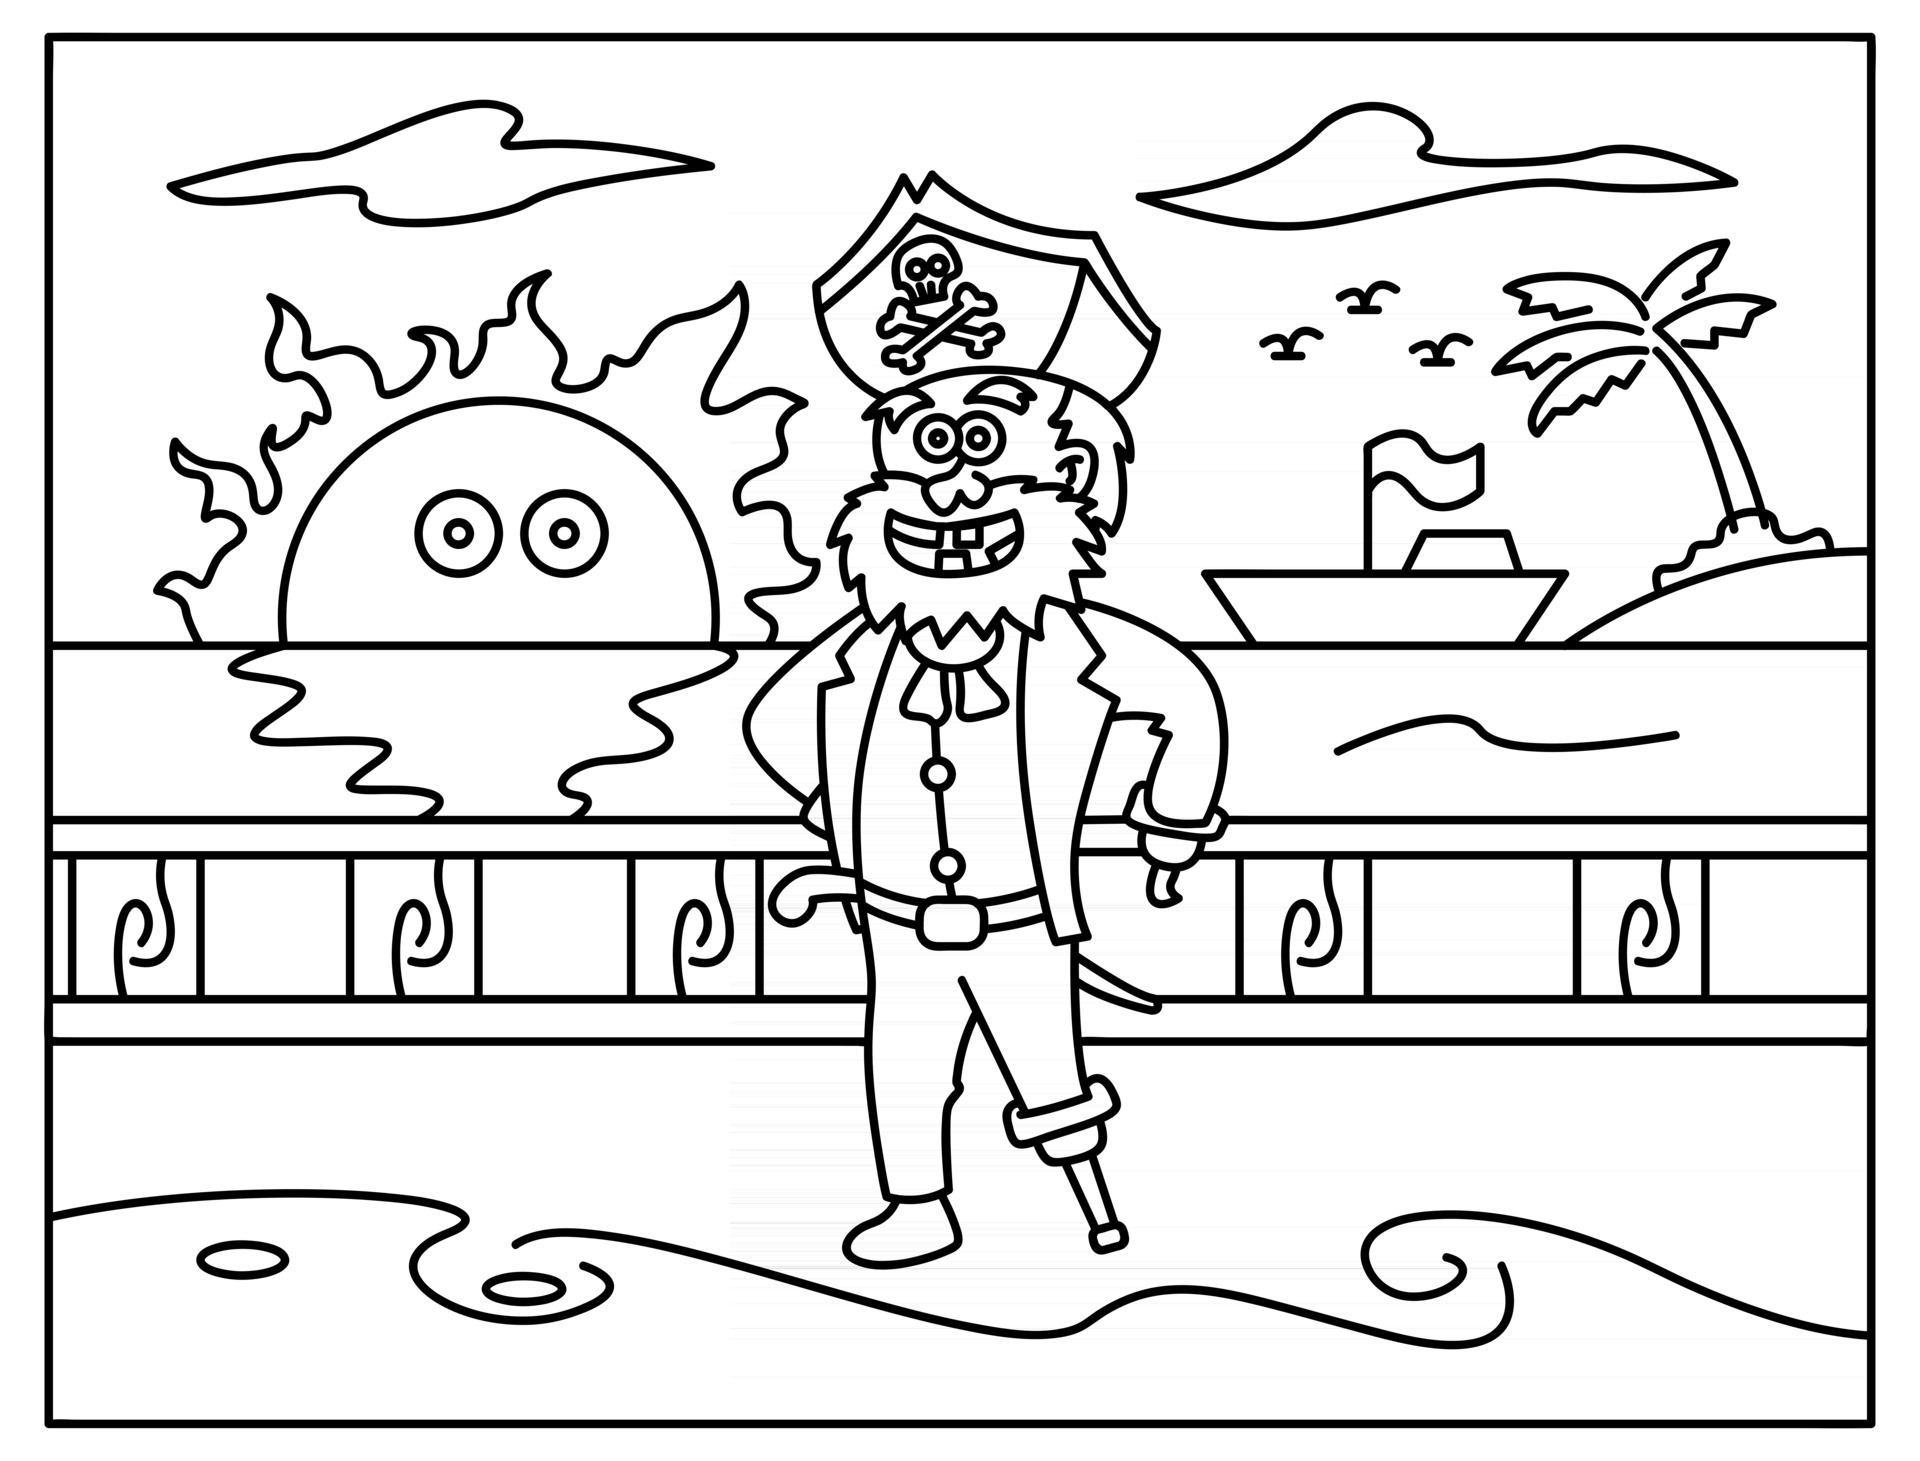 coloring book for kids. doodle illustration pirate. line art only ...